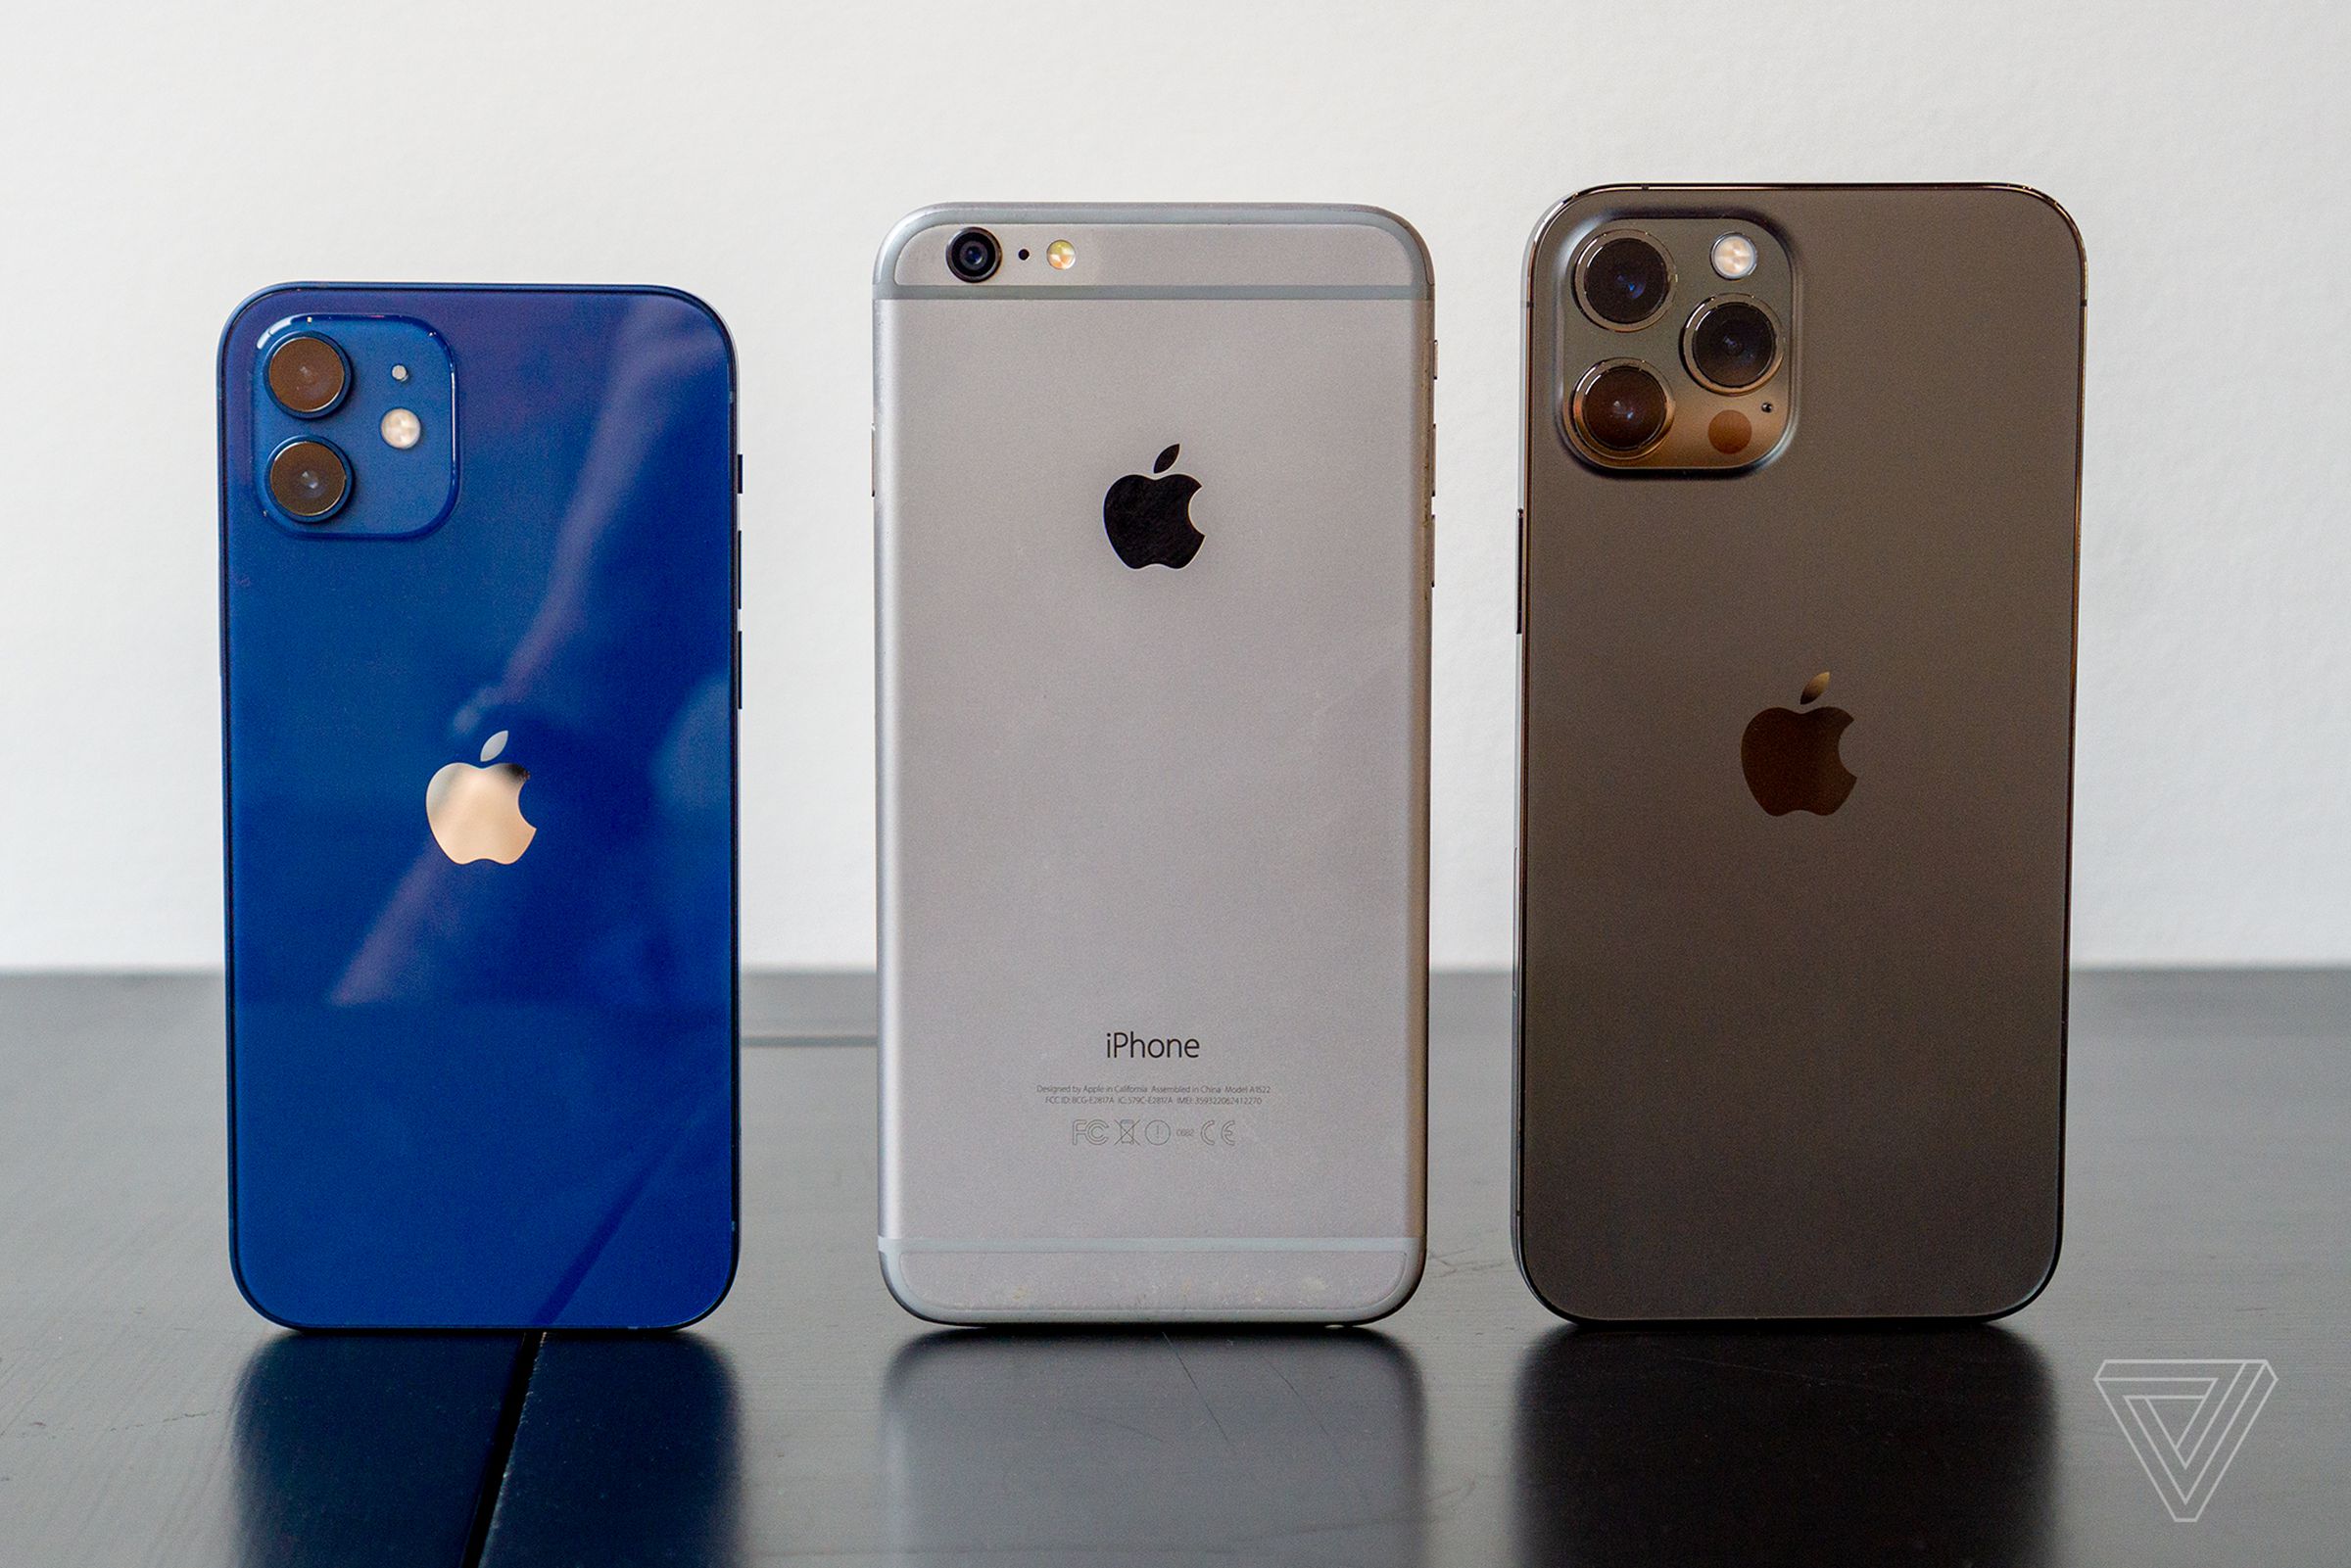 From left to right: the iPhone 12, iPhone 6 Plus, iPhone 12 Pro Max.